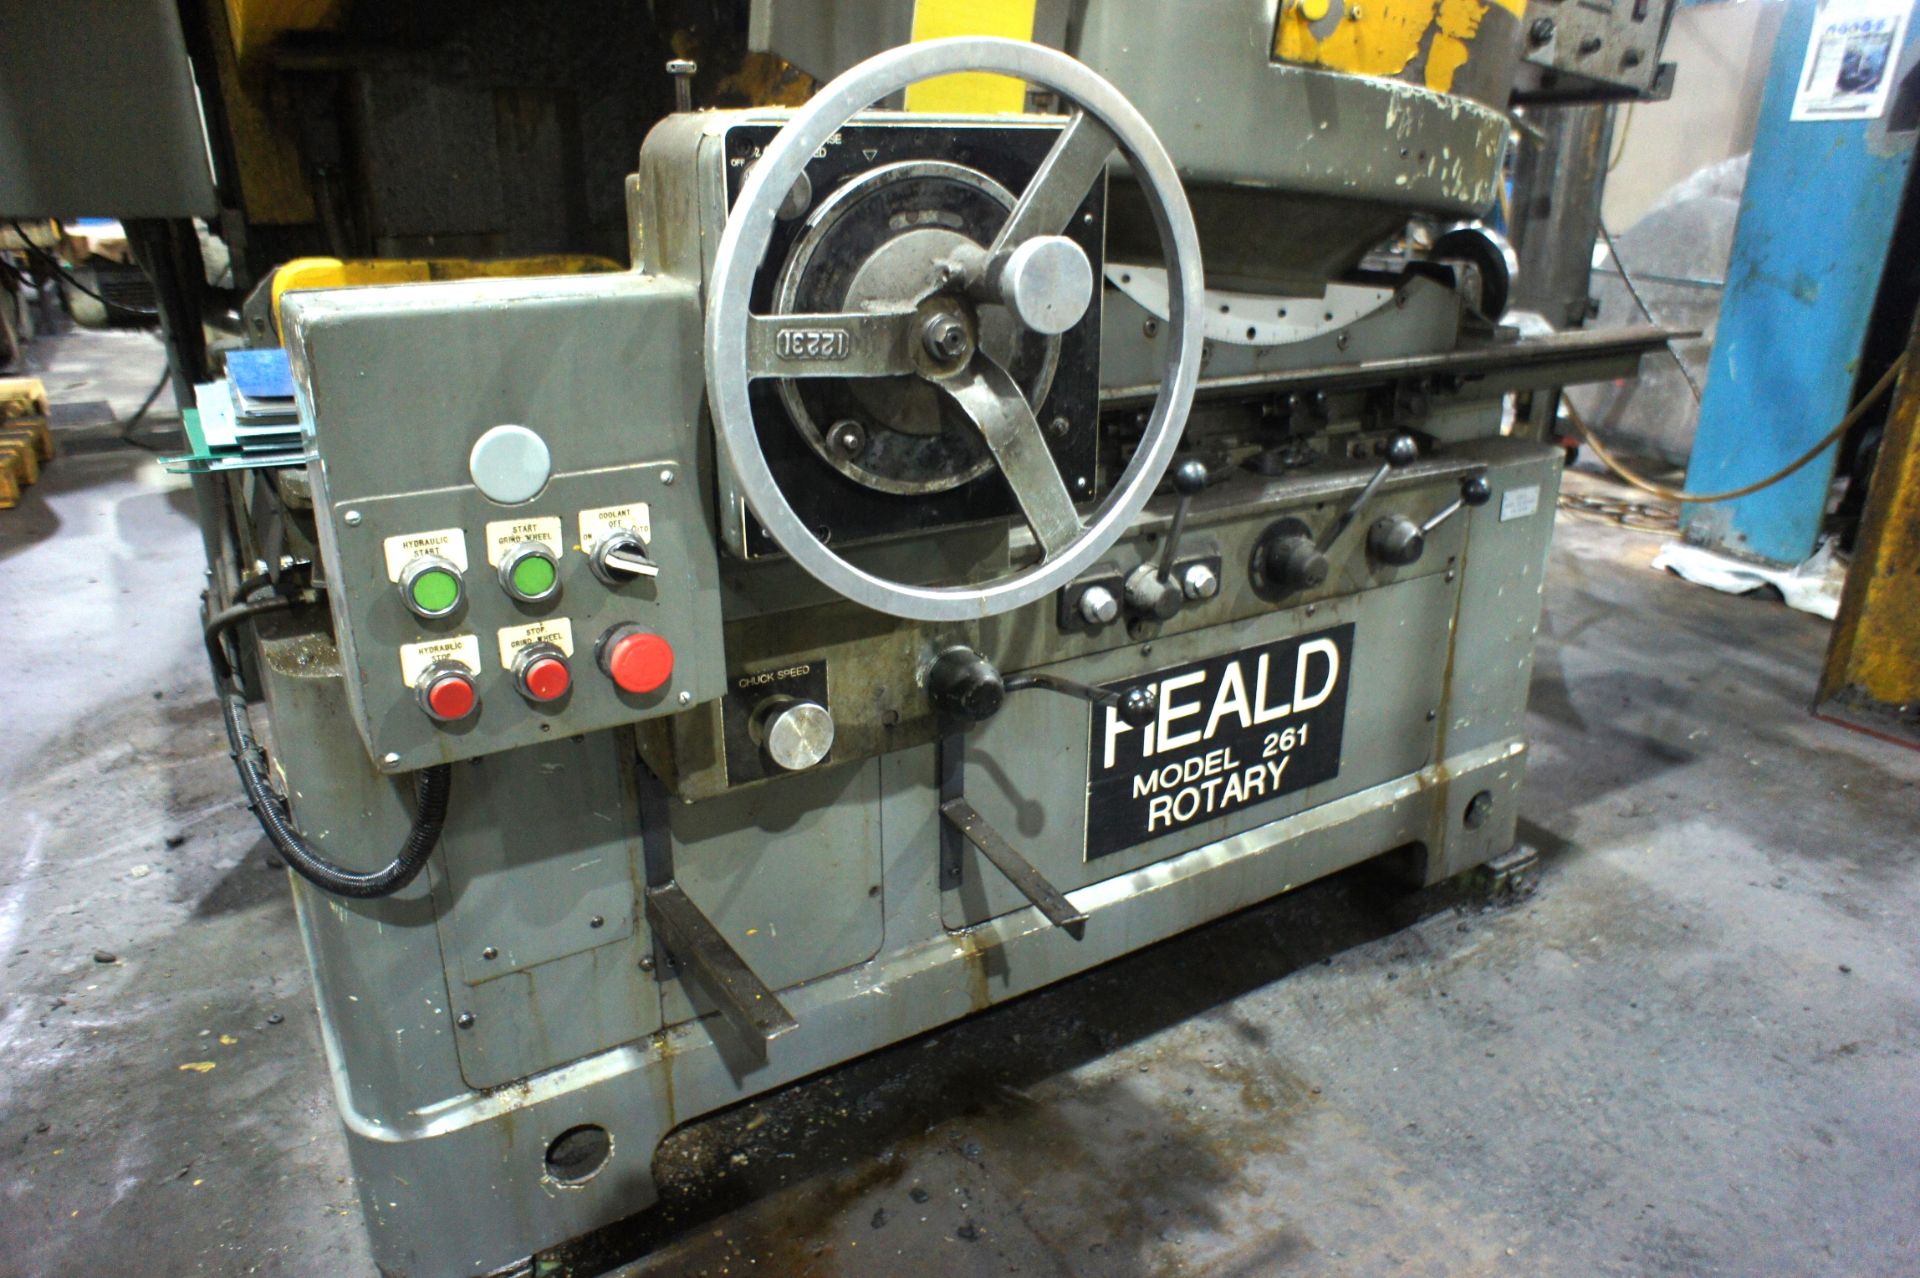 Heald 361 rotary surface grinder - Image 5 of 7